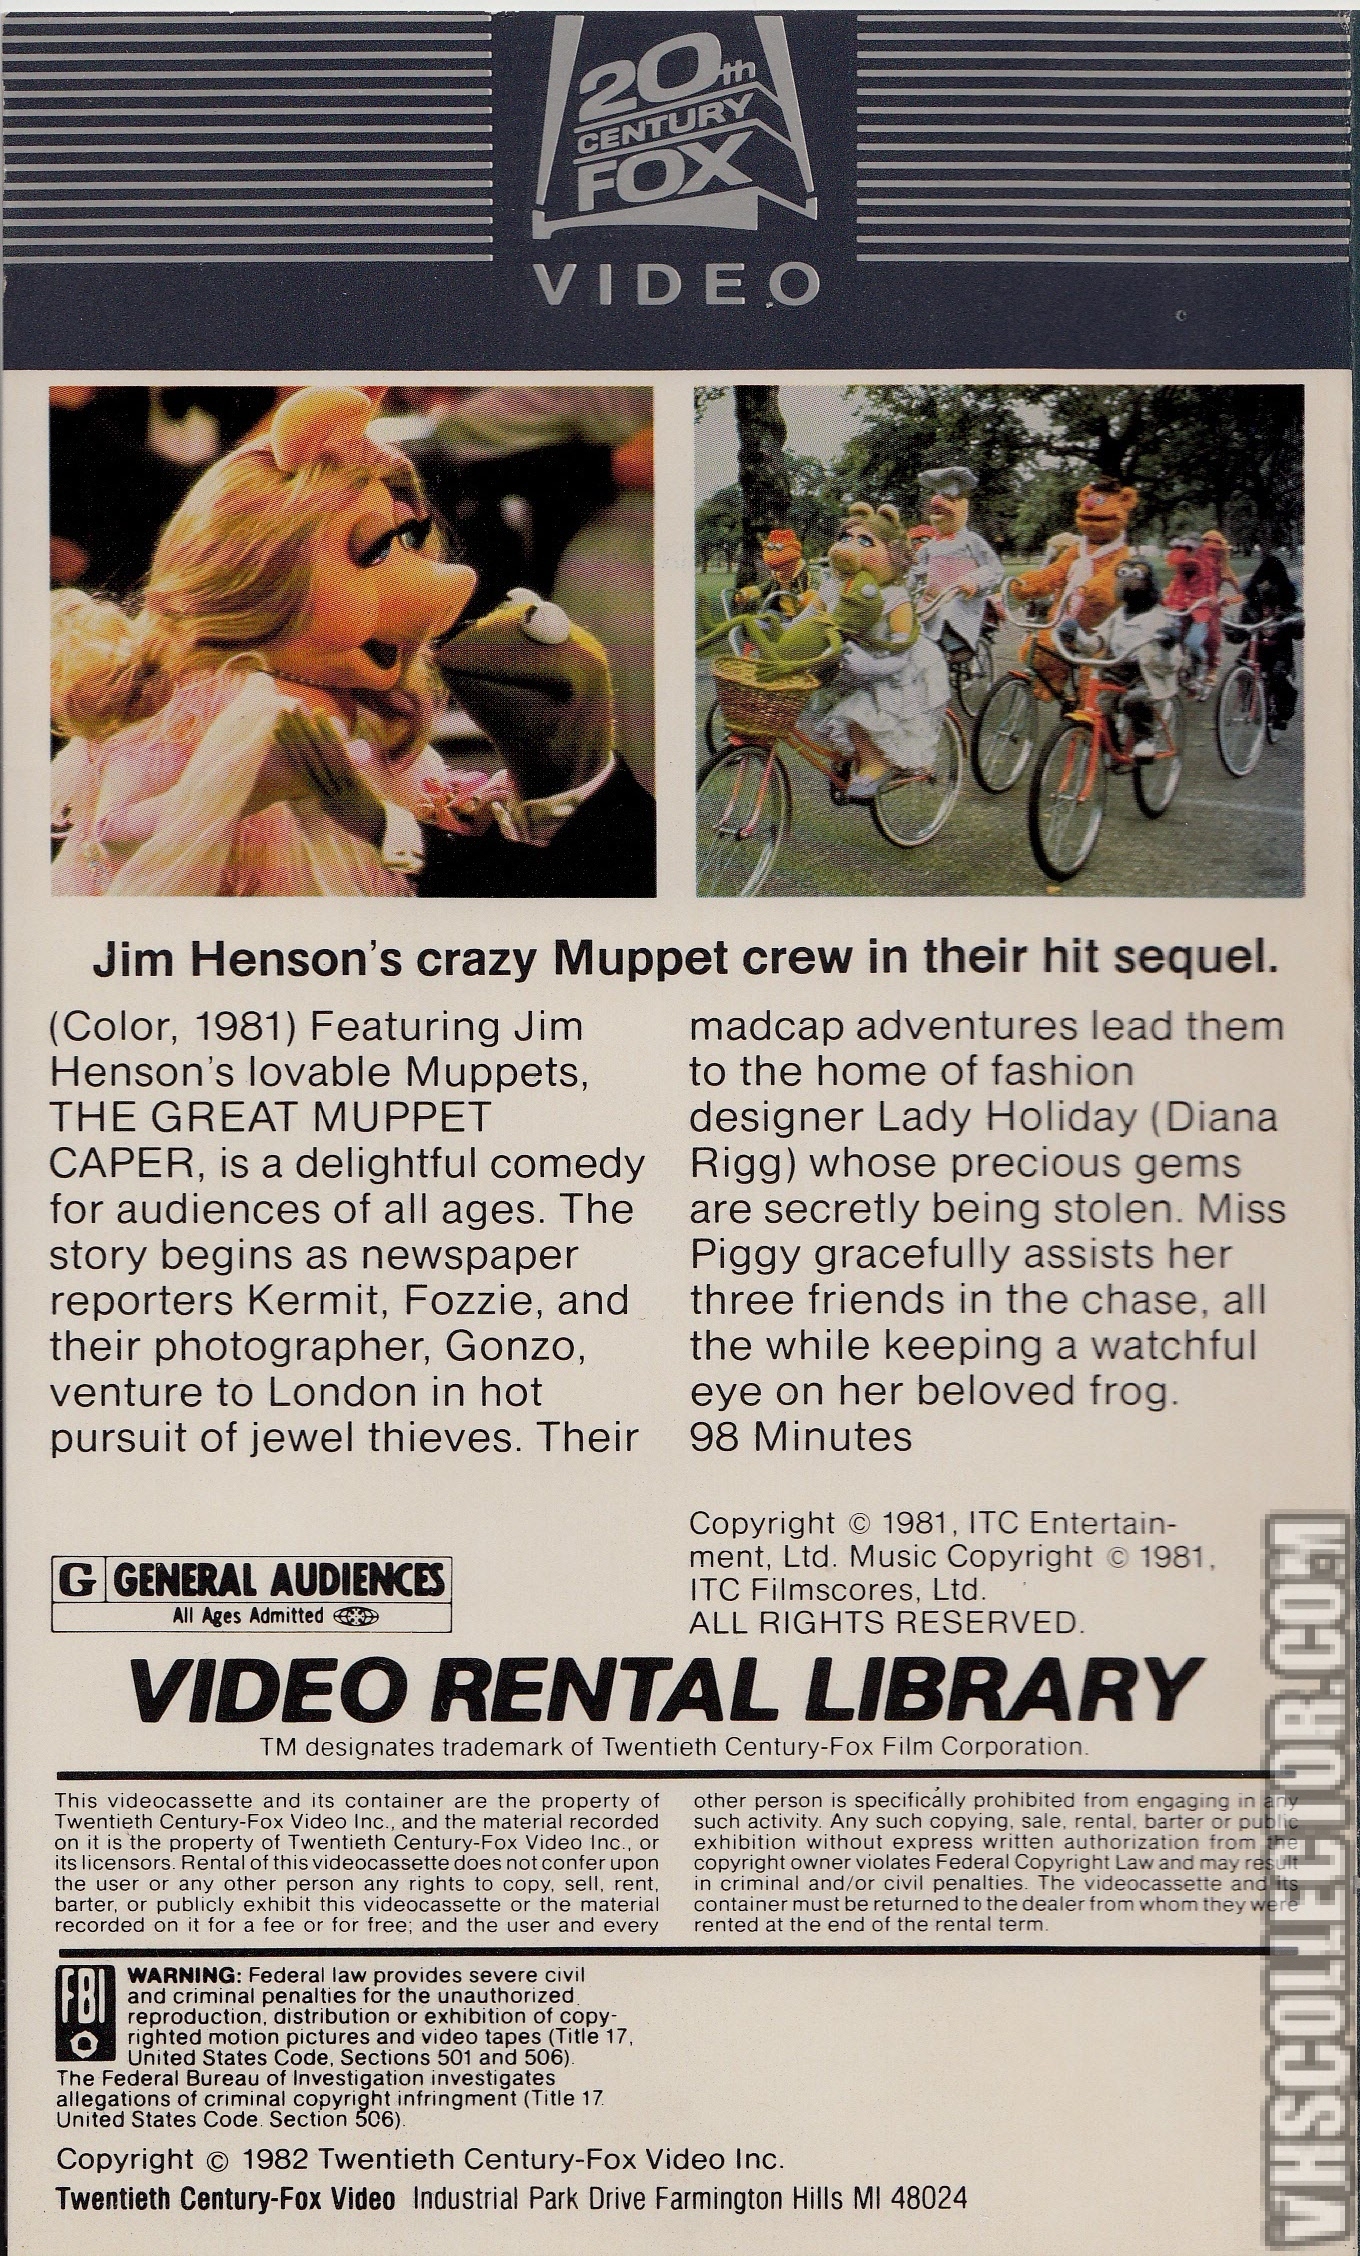 The Great Muppet Caper | VHSCollector.com